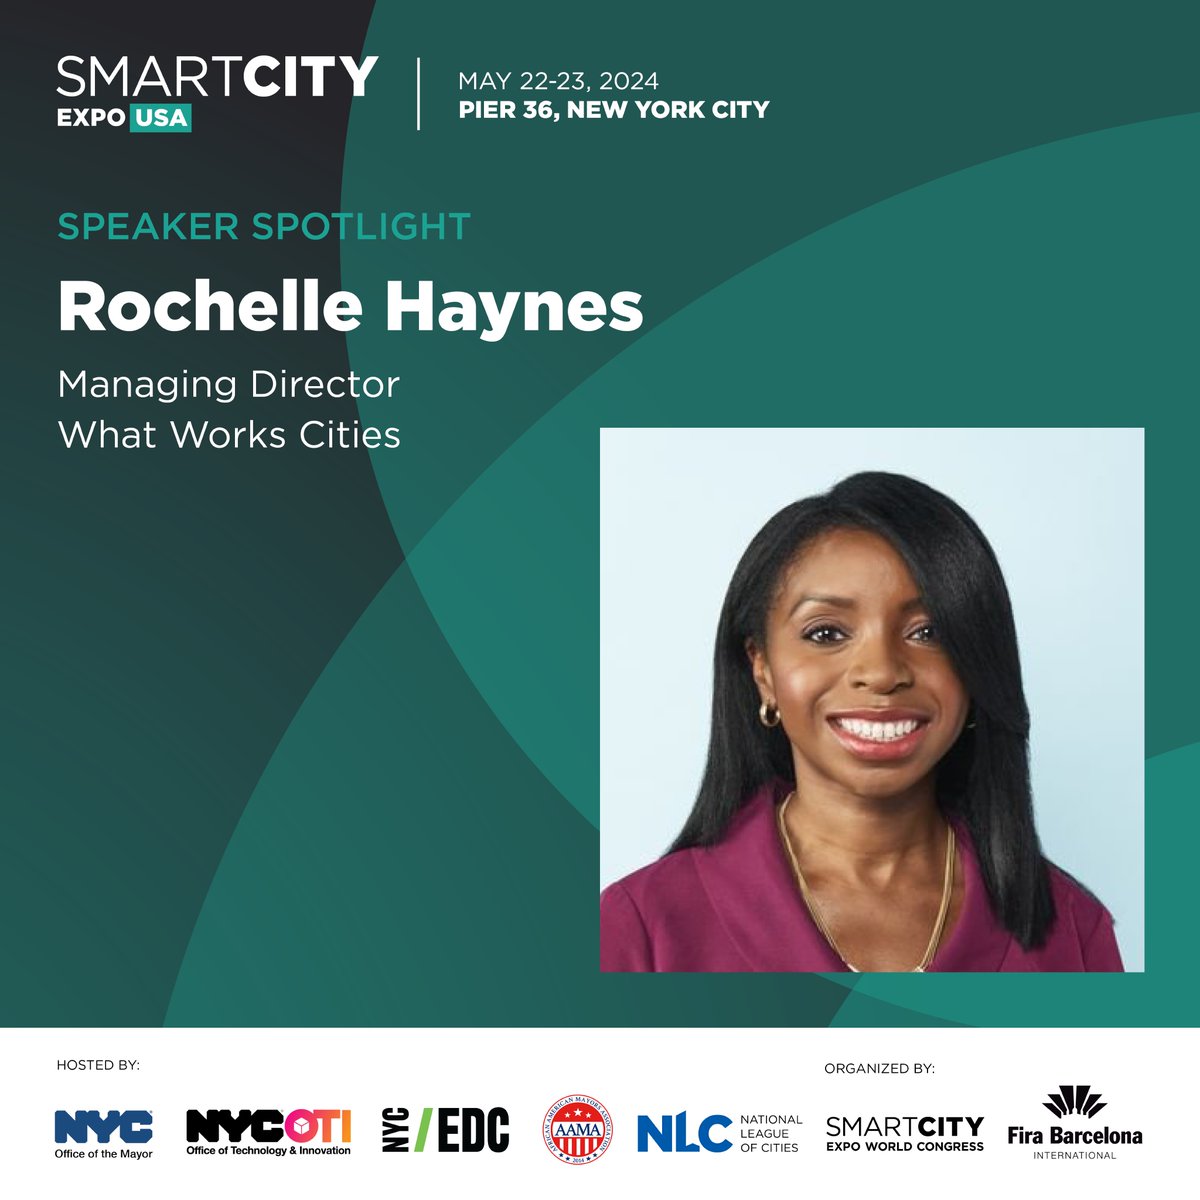 Join us at @SmartCityExpoUS! On 5/22, @RVHaynes will host a session with AI experts from across the U.S.. They'll chat about equity, resident participation, and what cities will look like in 10 years. Use SPEAKER20 for a 20% discount on tickets at smartcityexpousa.com!